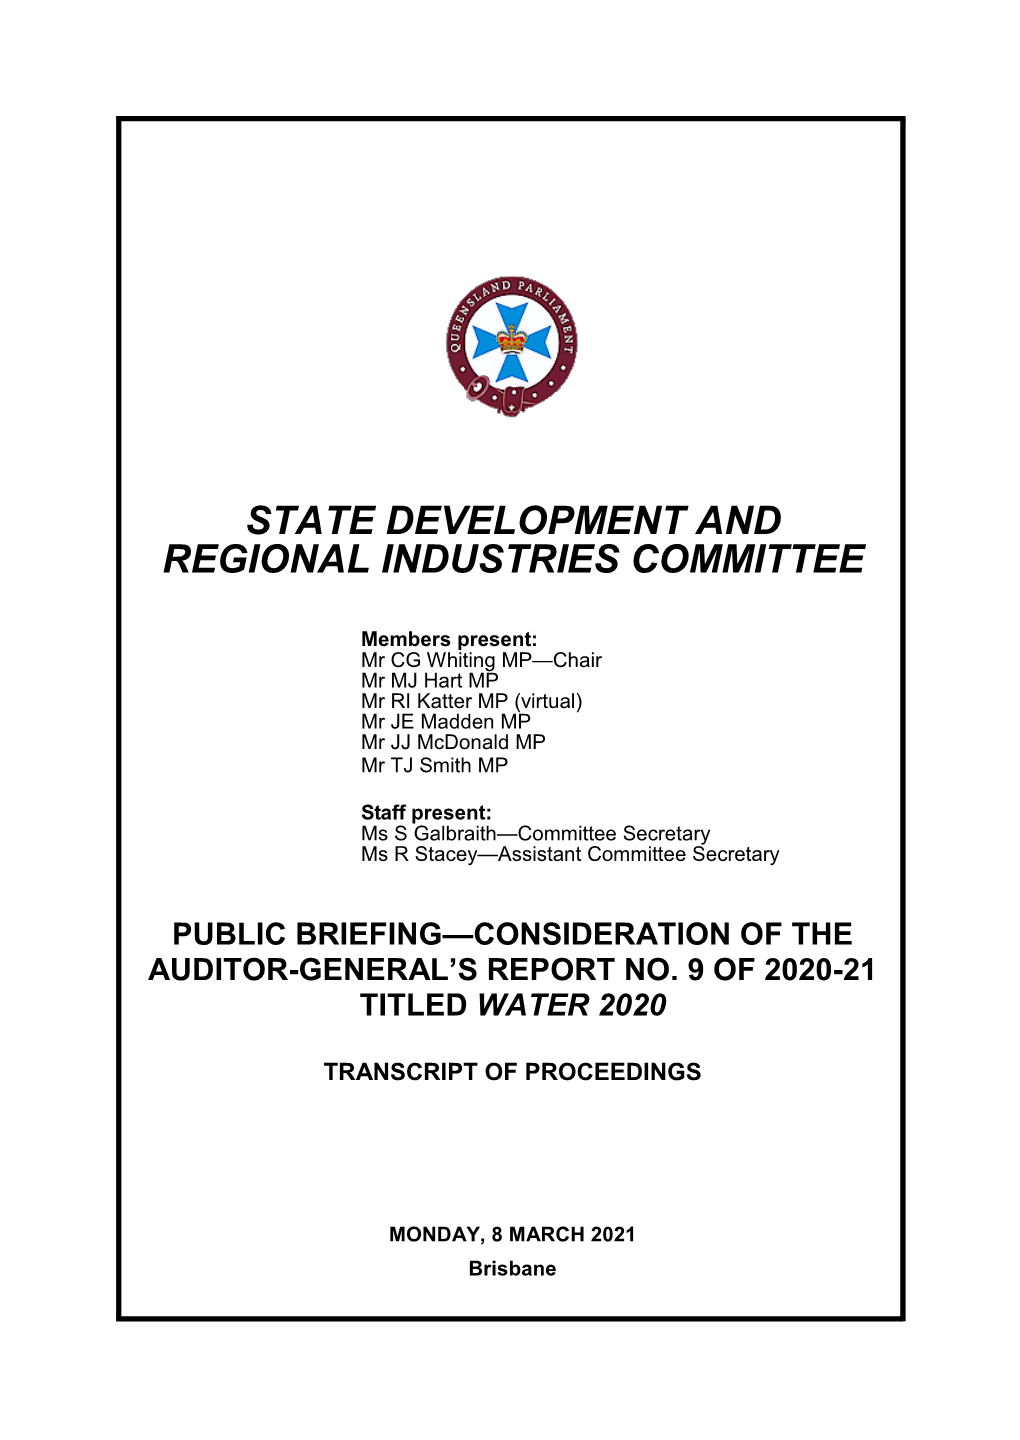 Consideration of Auditor-General's Report 9 2020-21